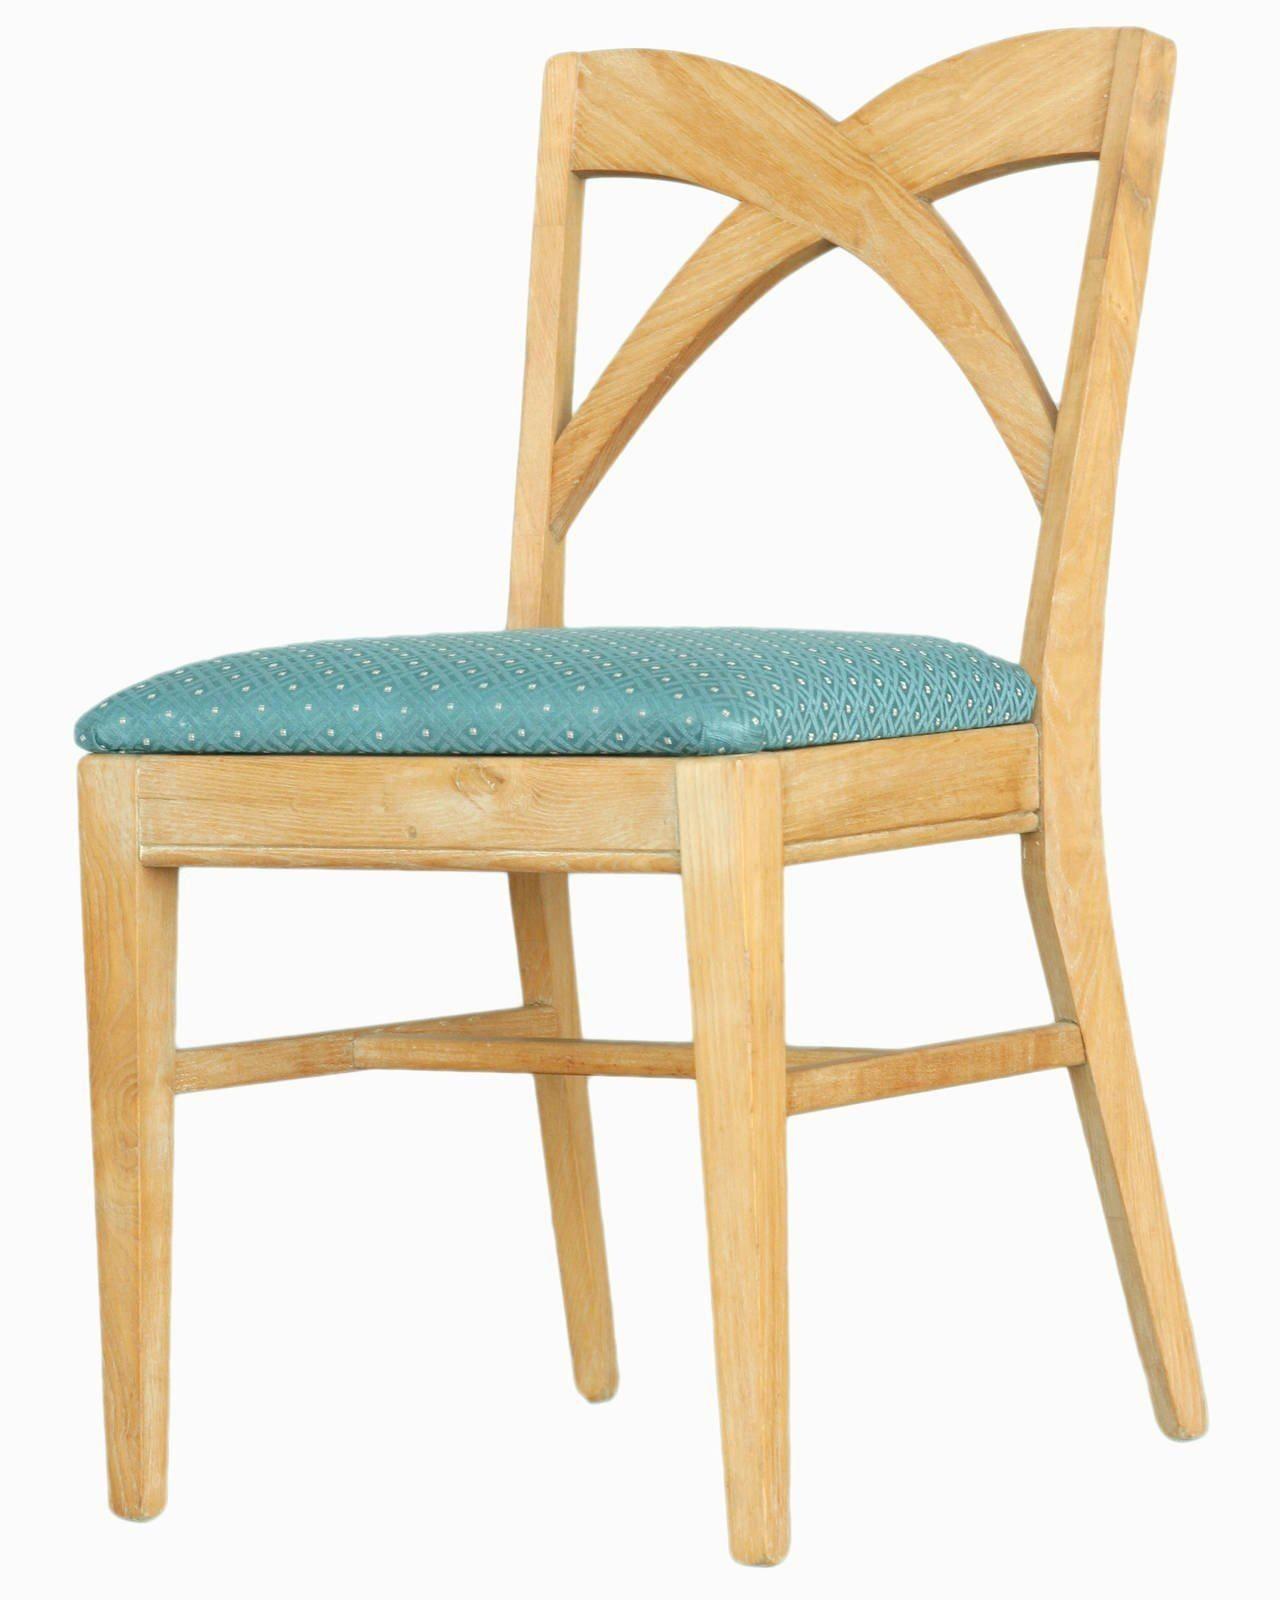 Set of dining chairs by Paul Frankl for the Brown Saltman group. The chairs are upholstered in high quality blue cotton fabric with a unique crisscross 